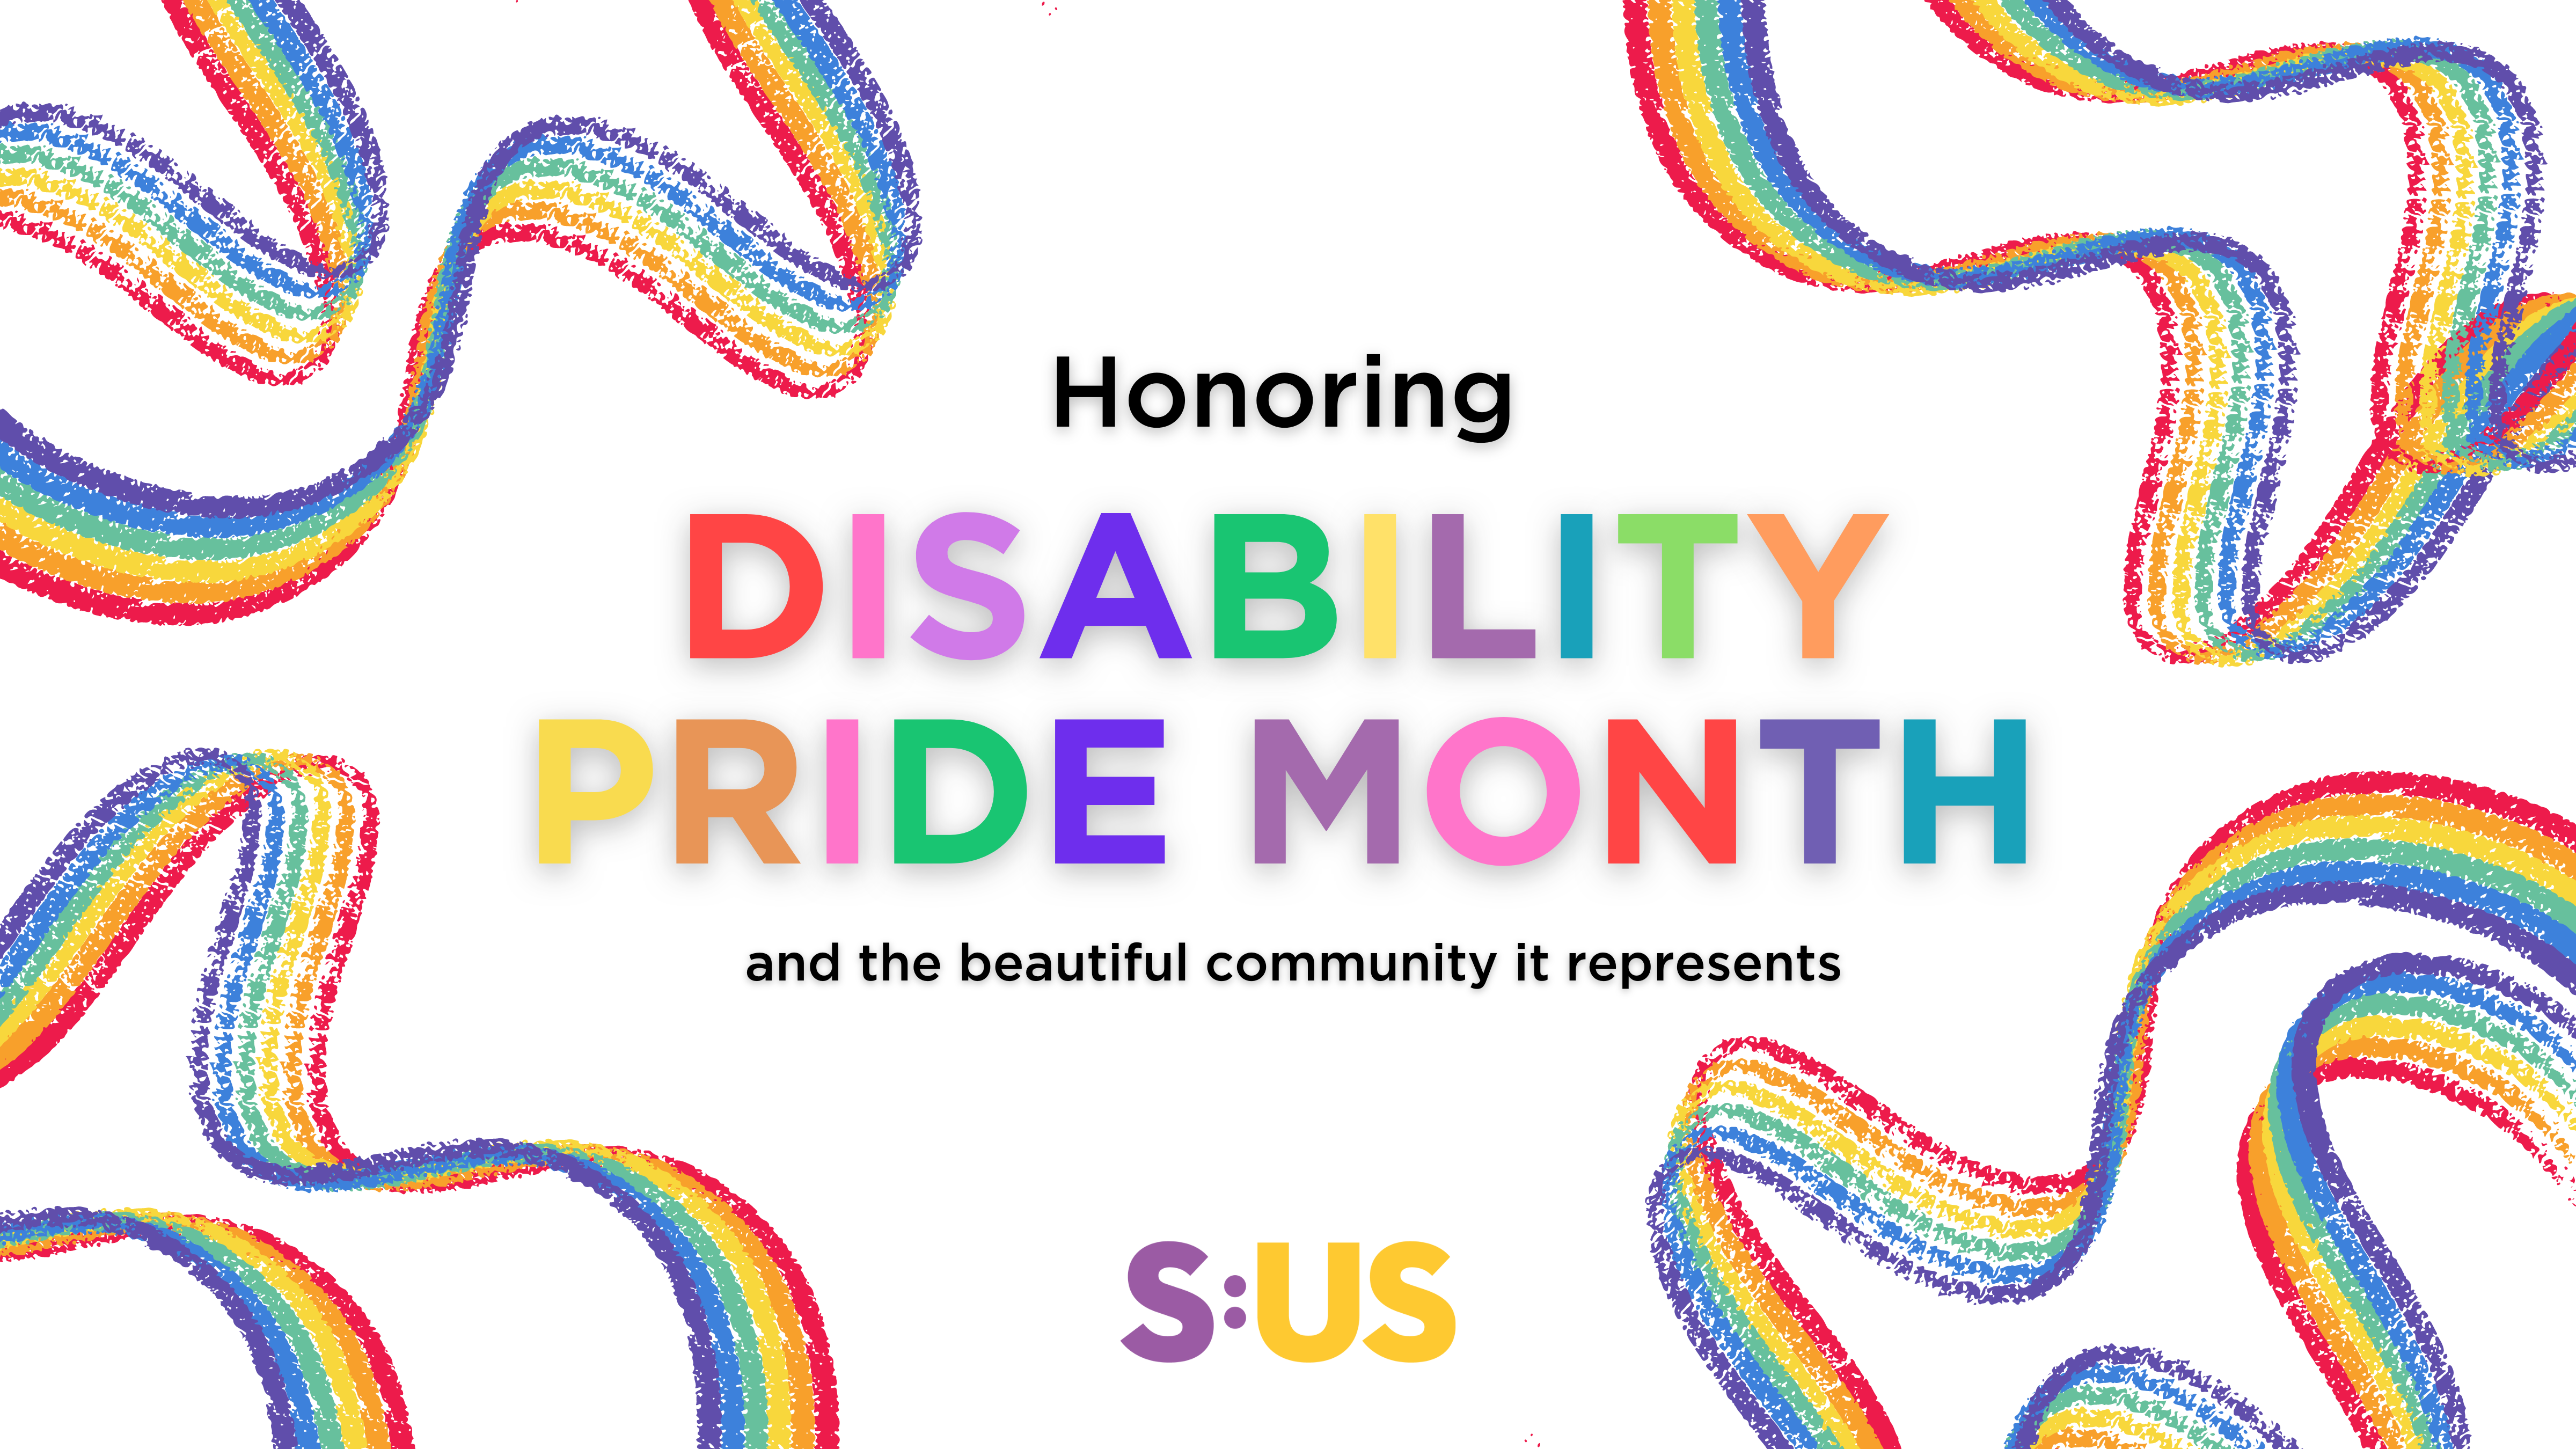 Disability Pride Month in July